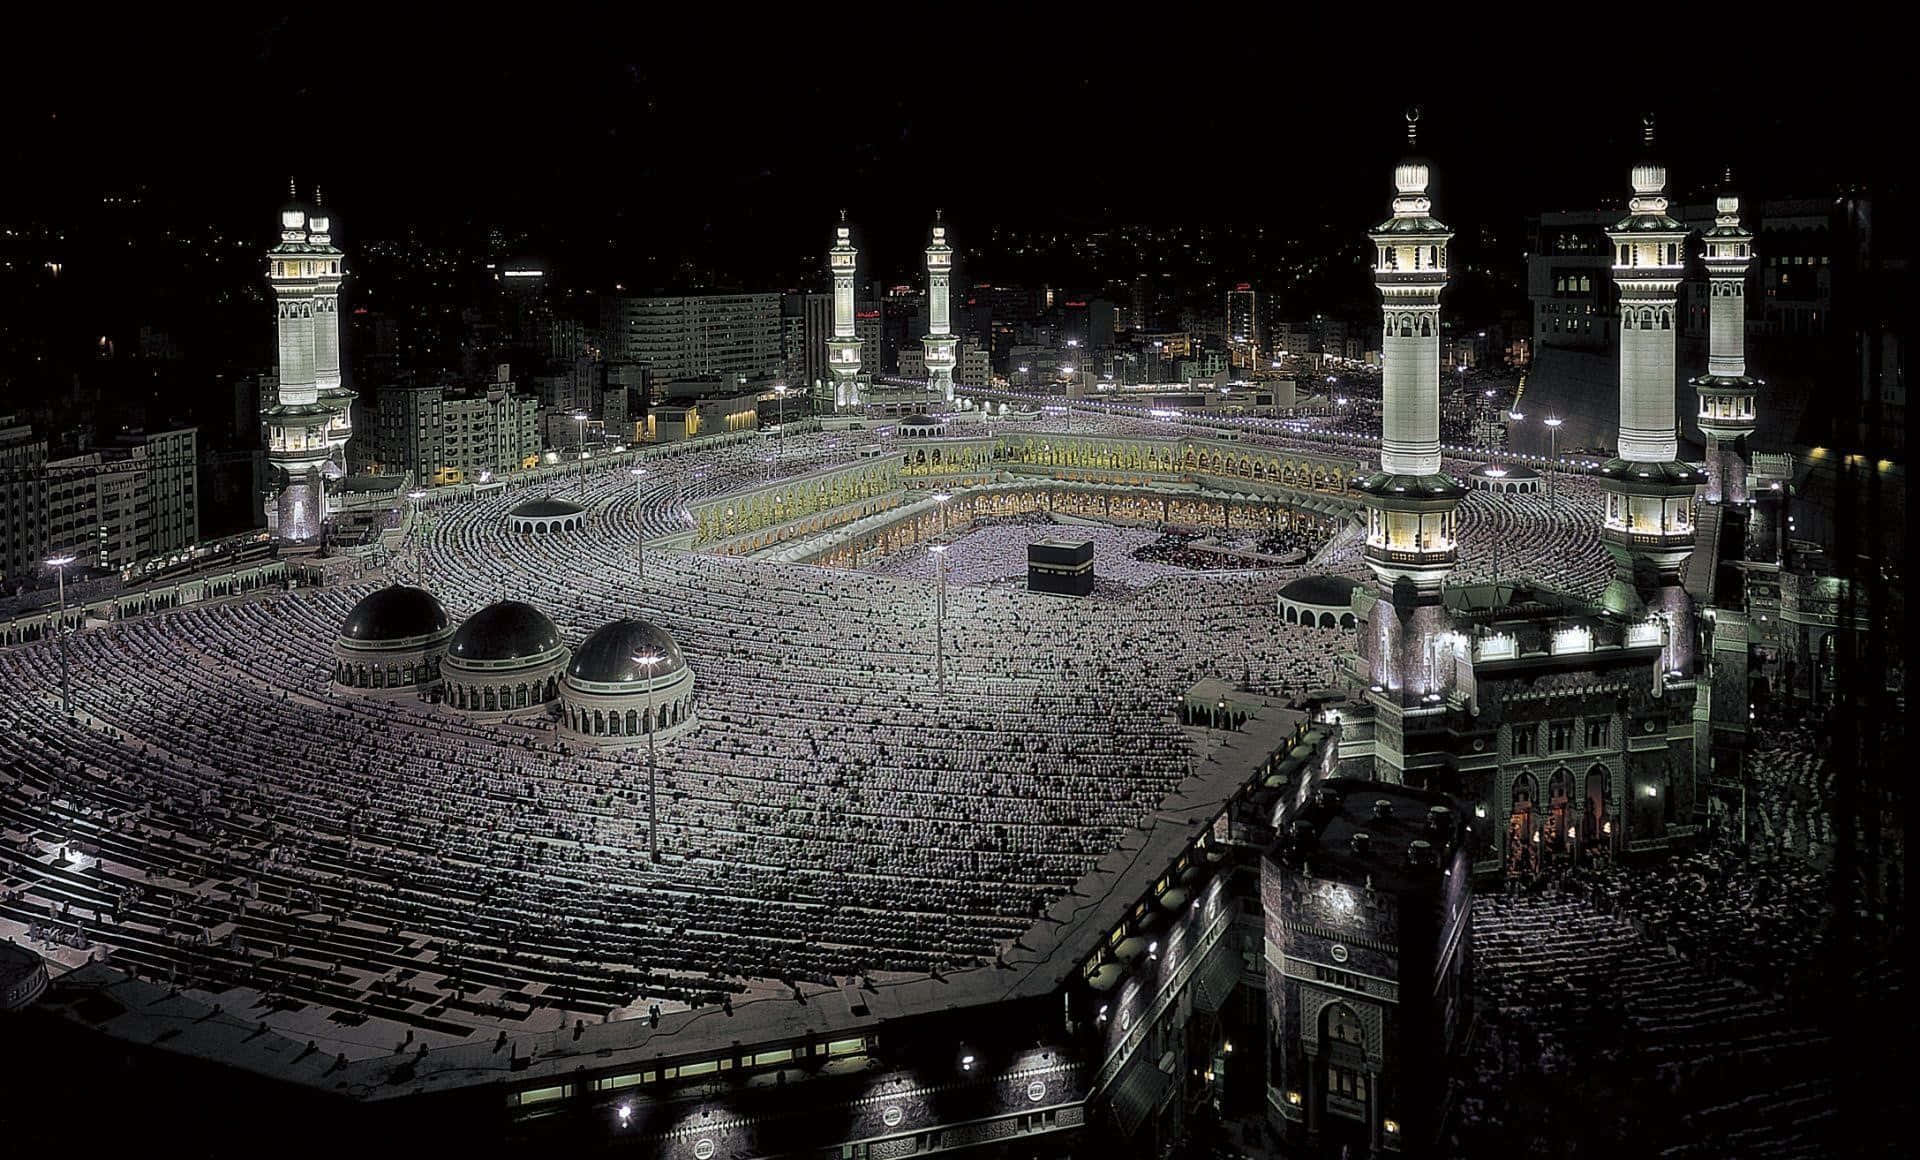 The Kaaba At Night With Many People Around It